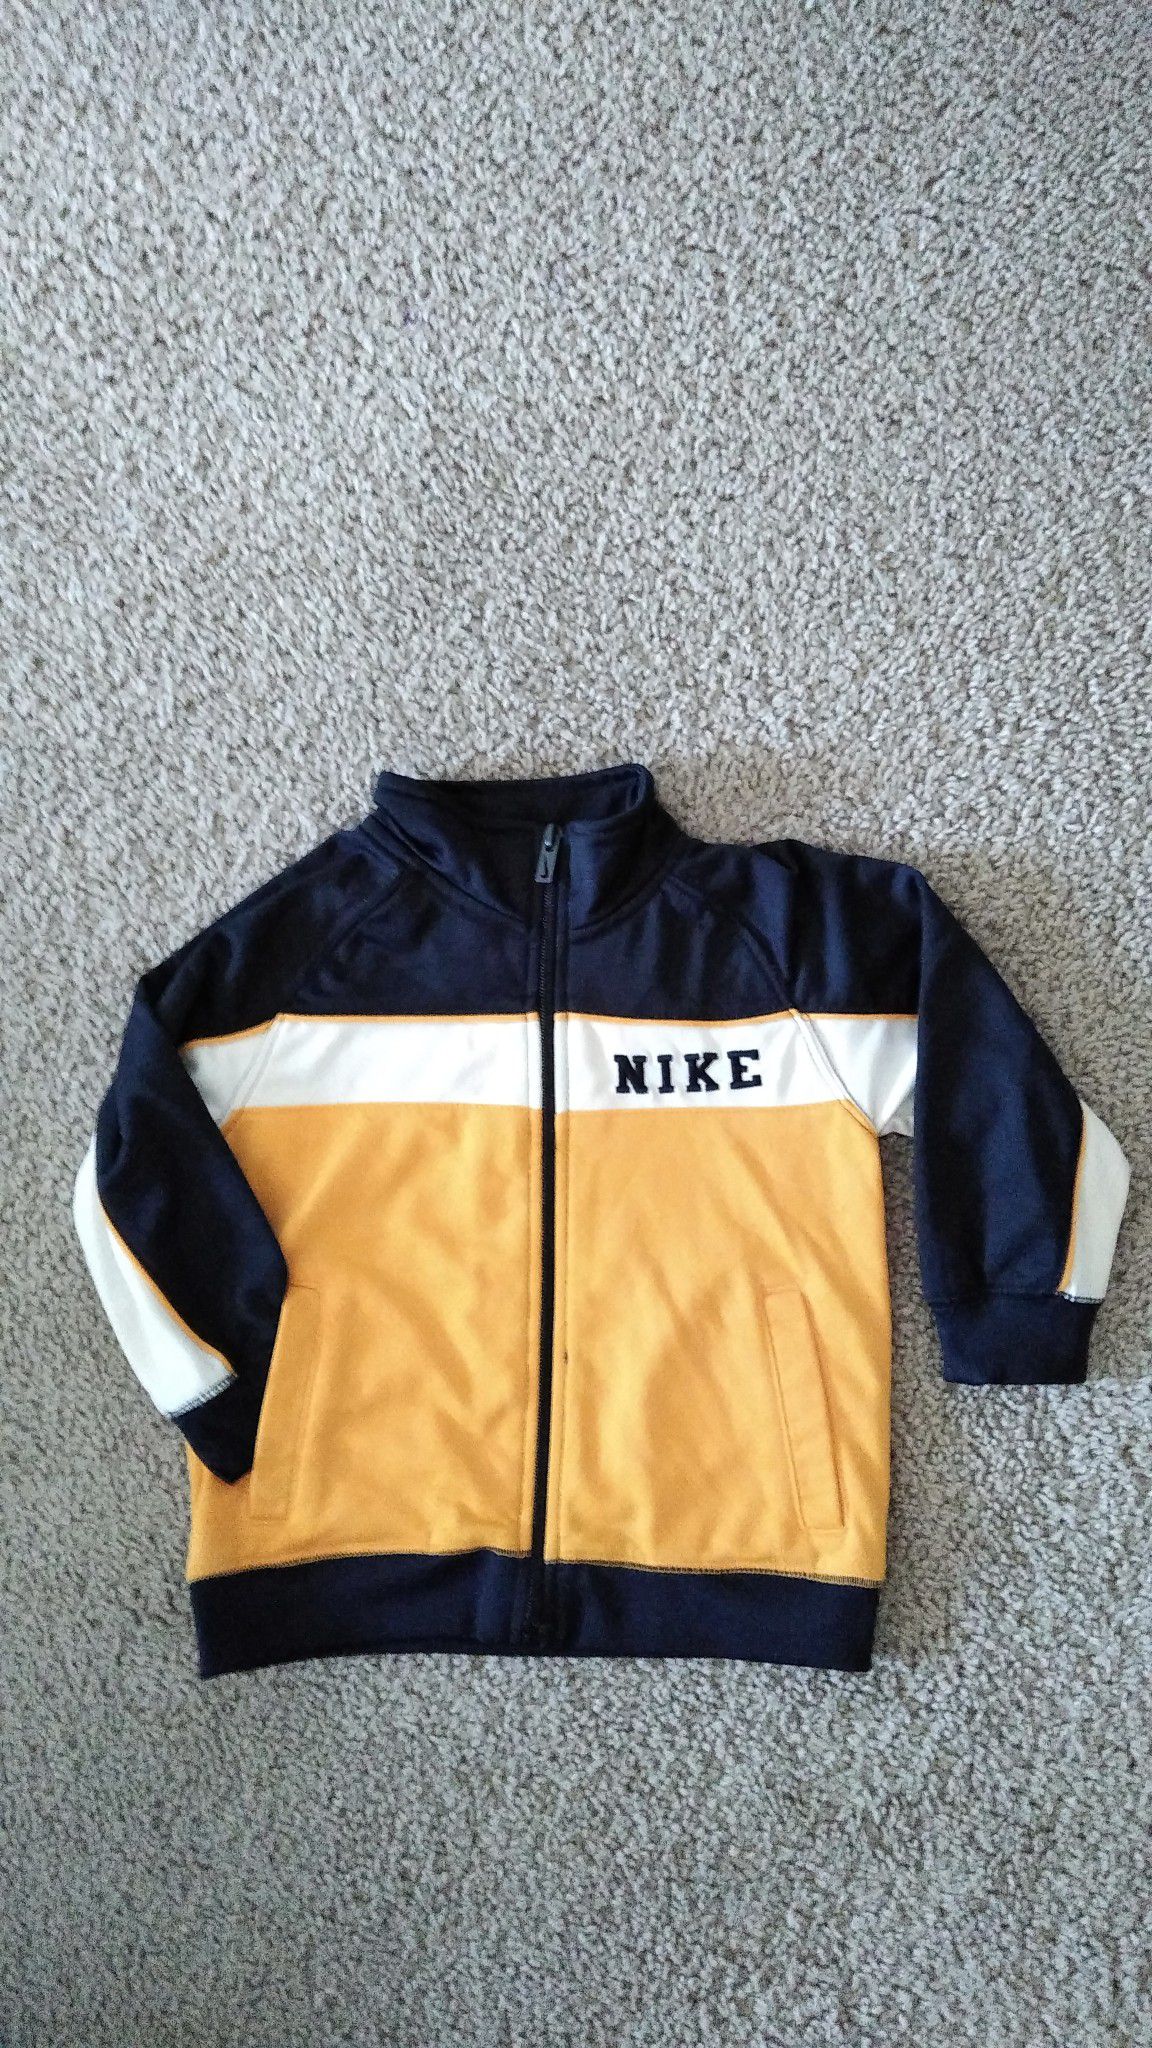 Beautiful Nike Jacket , toddler size 3 ( excellent condition )